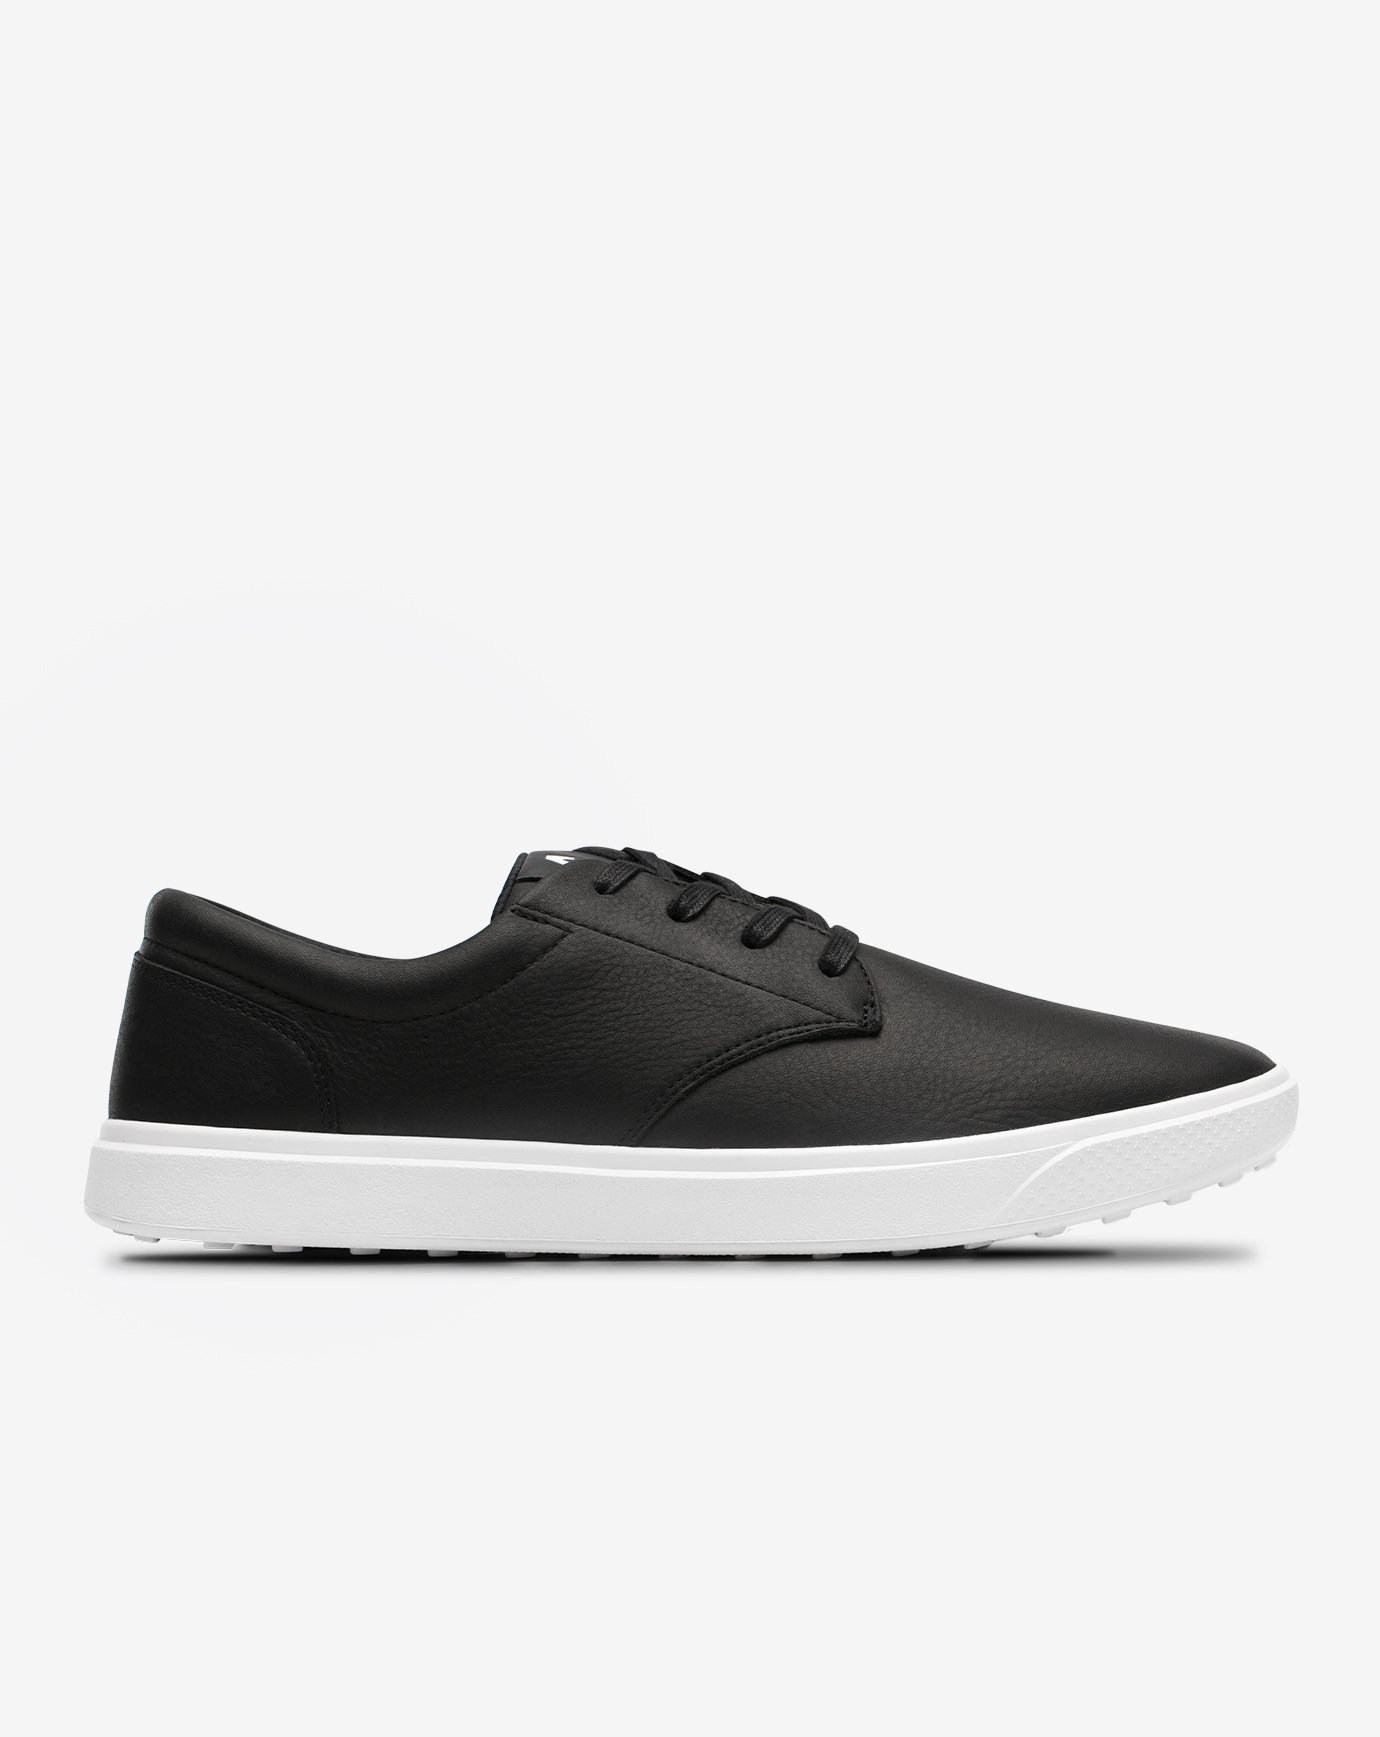 THE WILDCARD LEATHER SPIKELESS GOLF SHOE Image 3